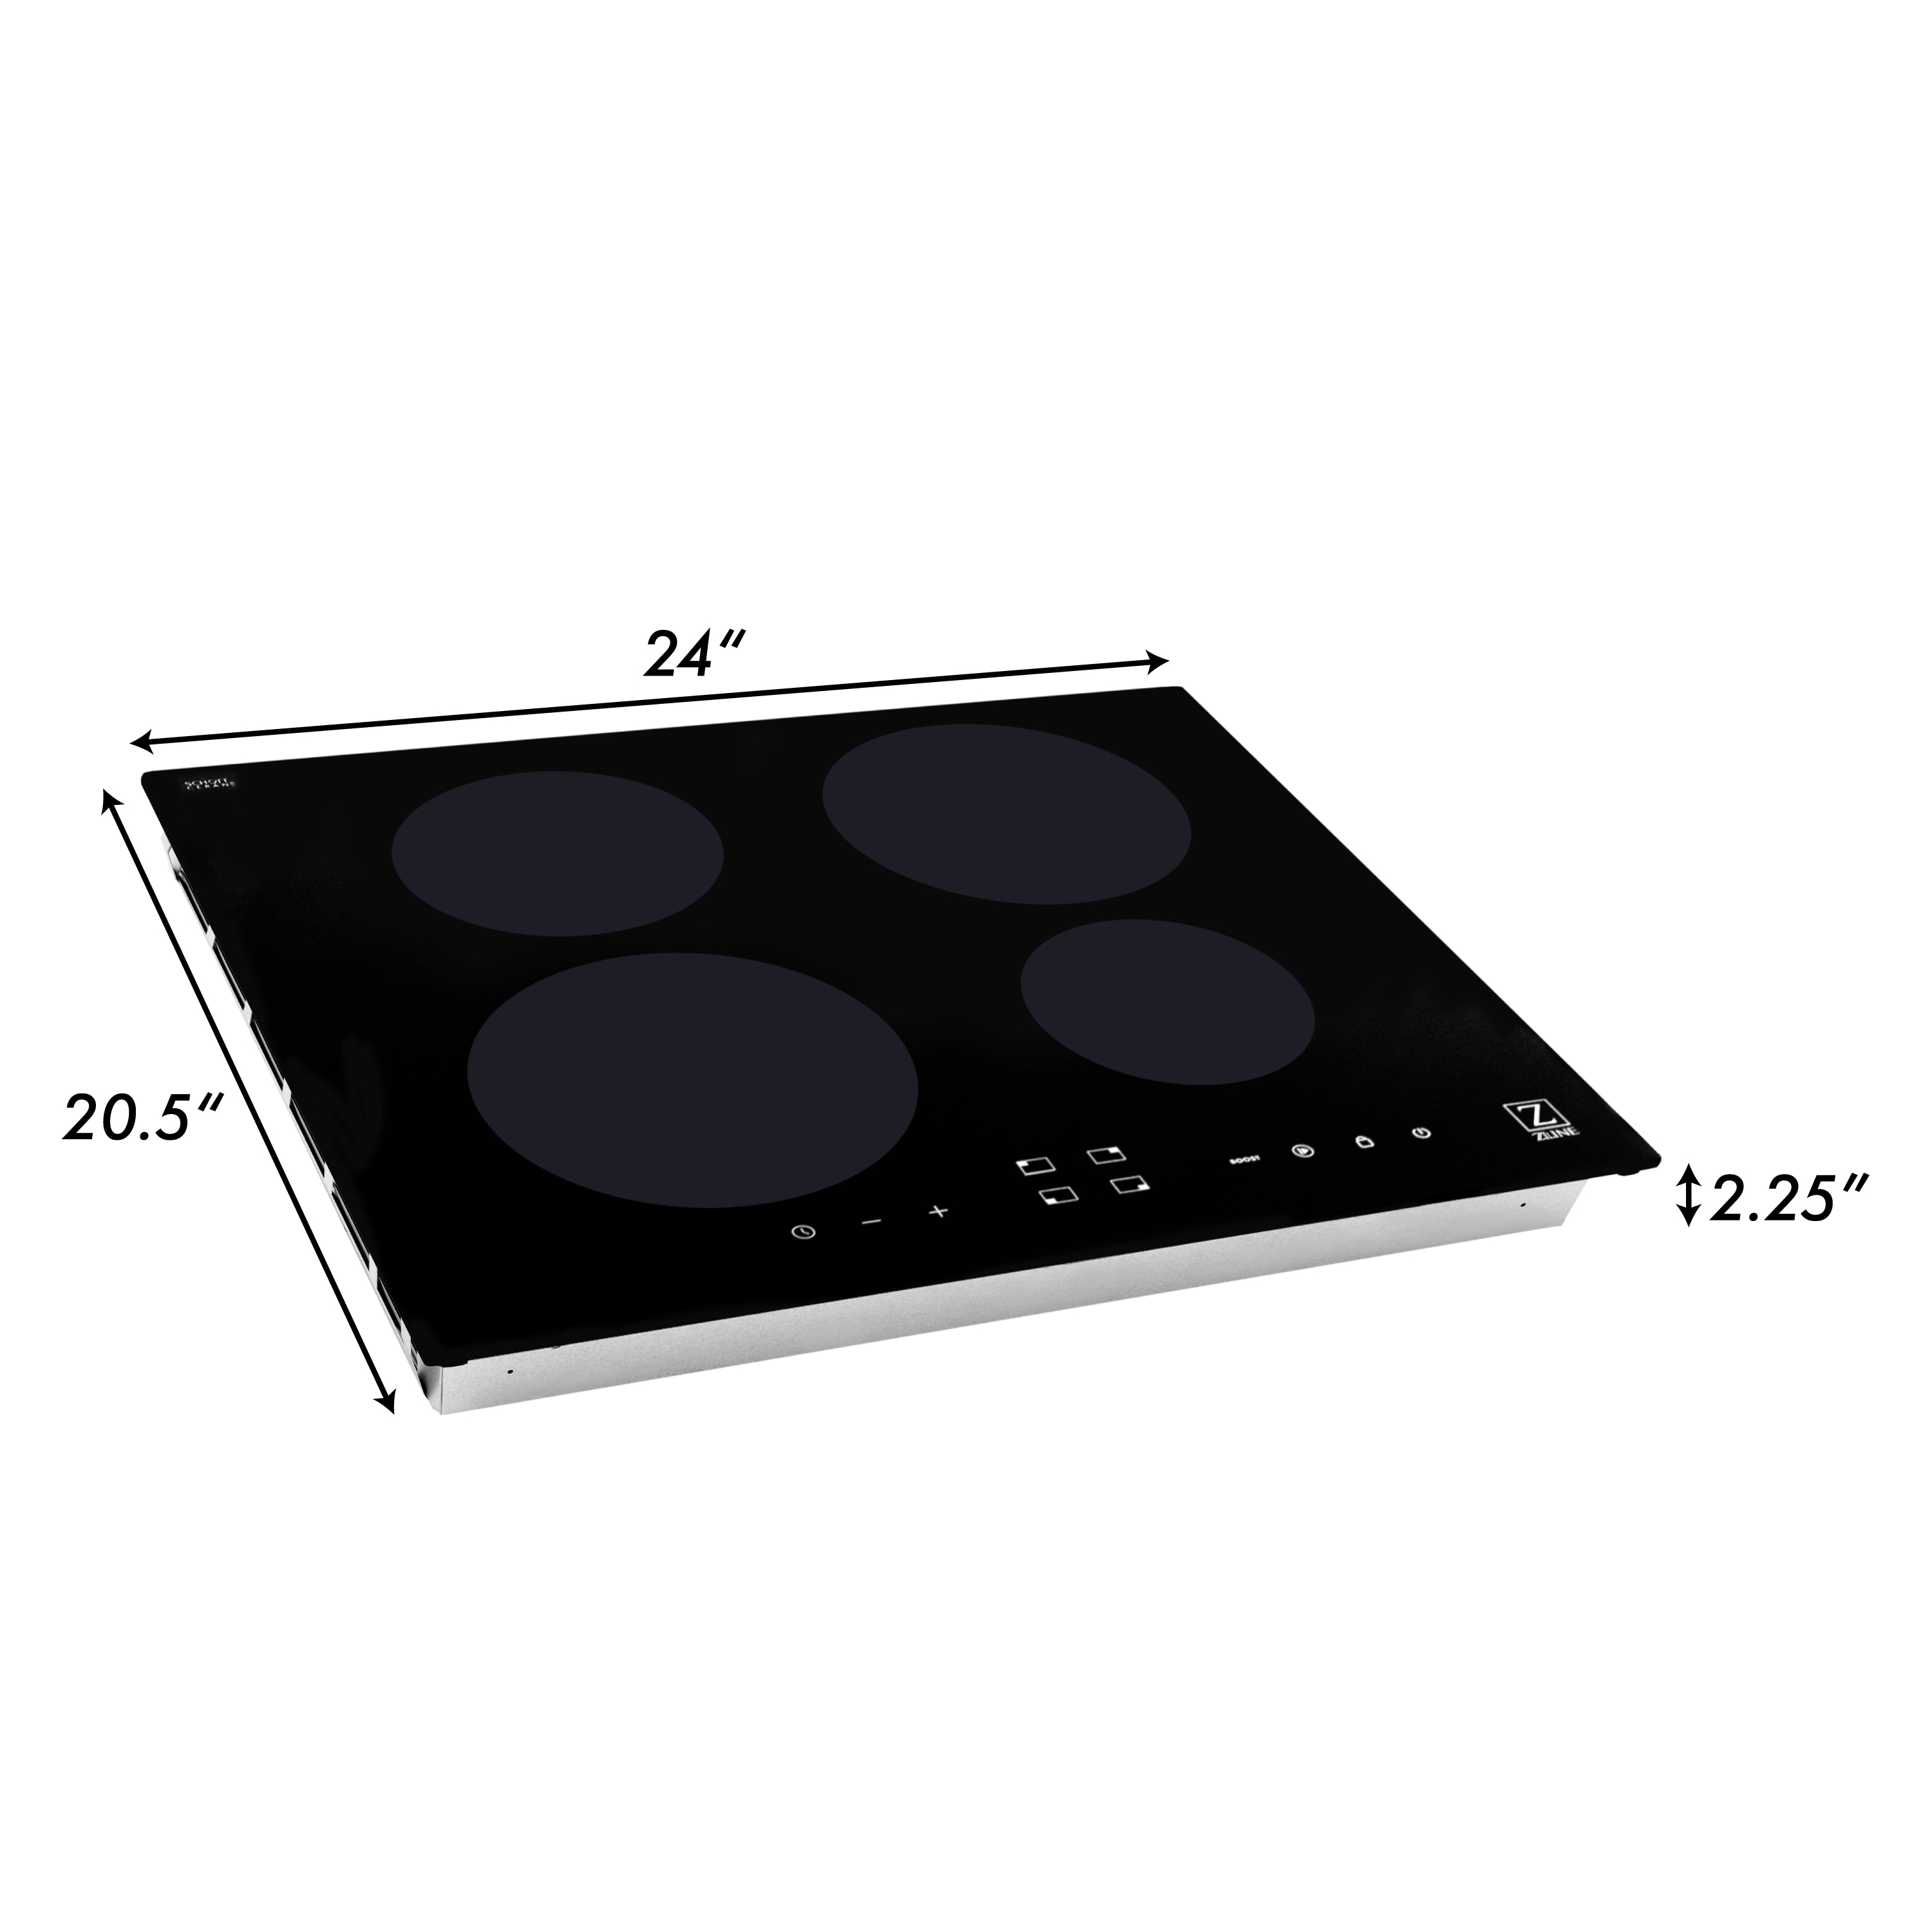 - 4 COOKING ZONES NEW CROWN INDUCTION COOKTOP 